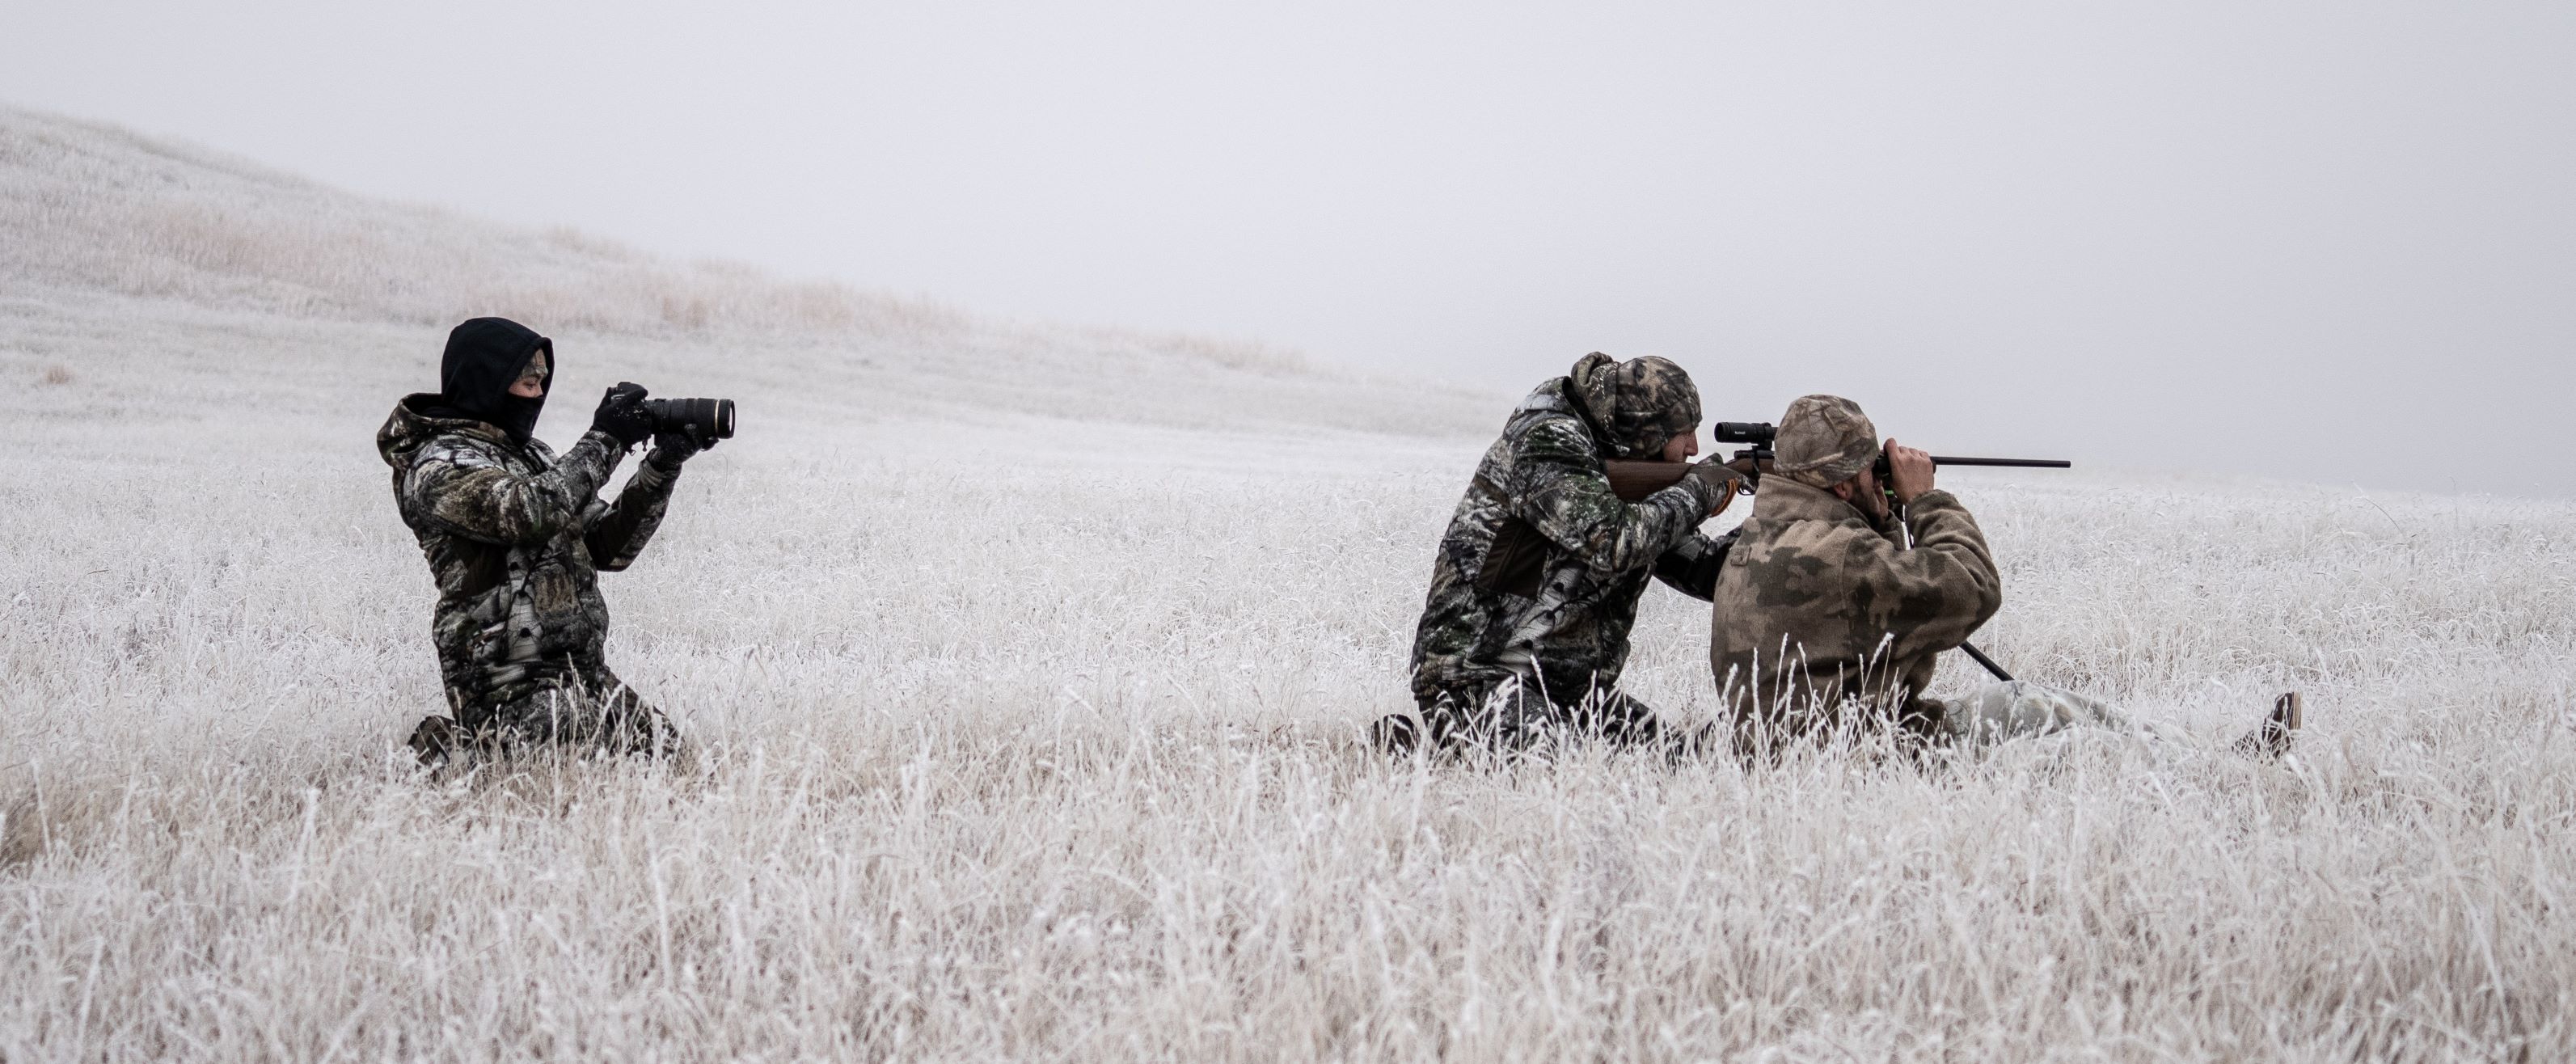 A hunter kneeling in a foggy field in shooting position with two other hunters.